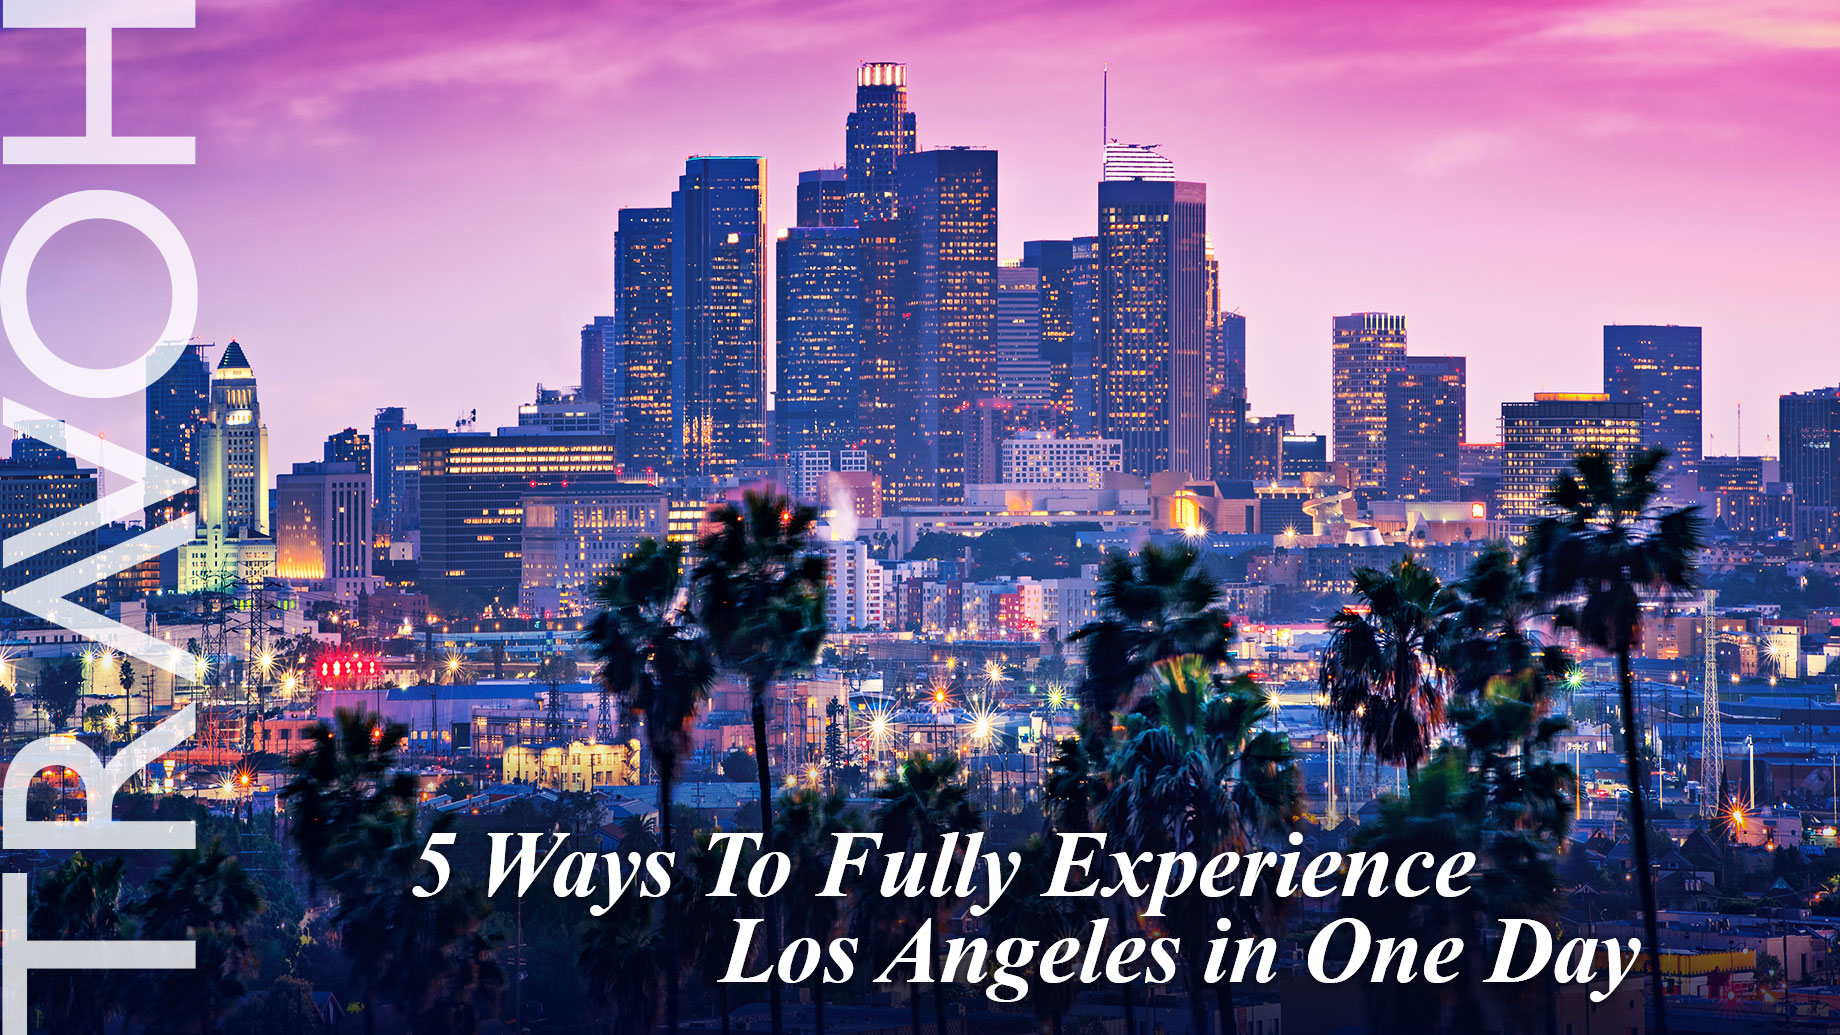 5 Ways To Fully Experience Los Angeles in One Day